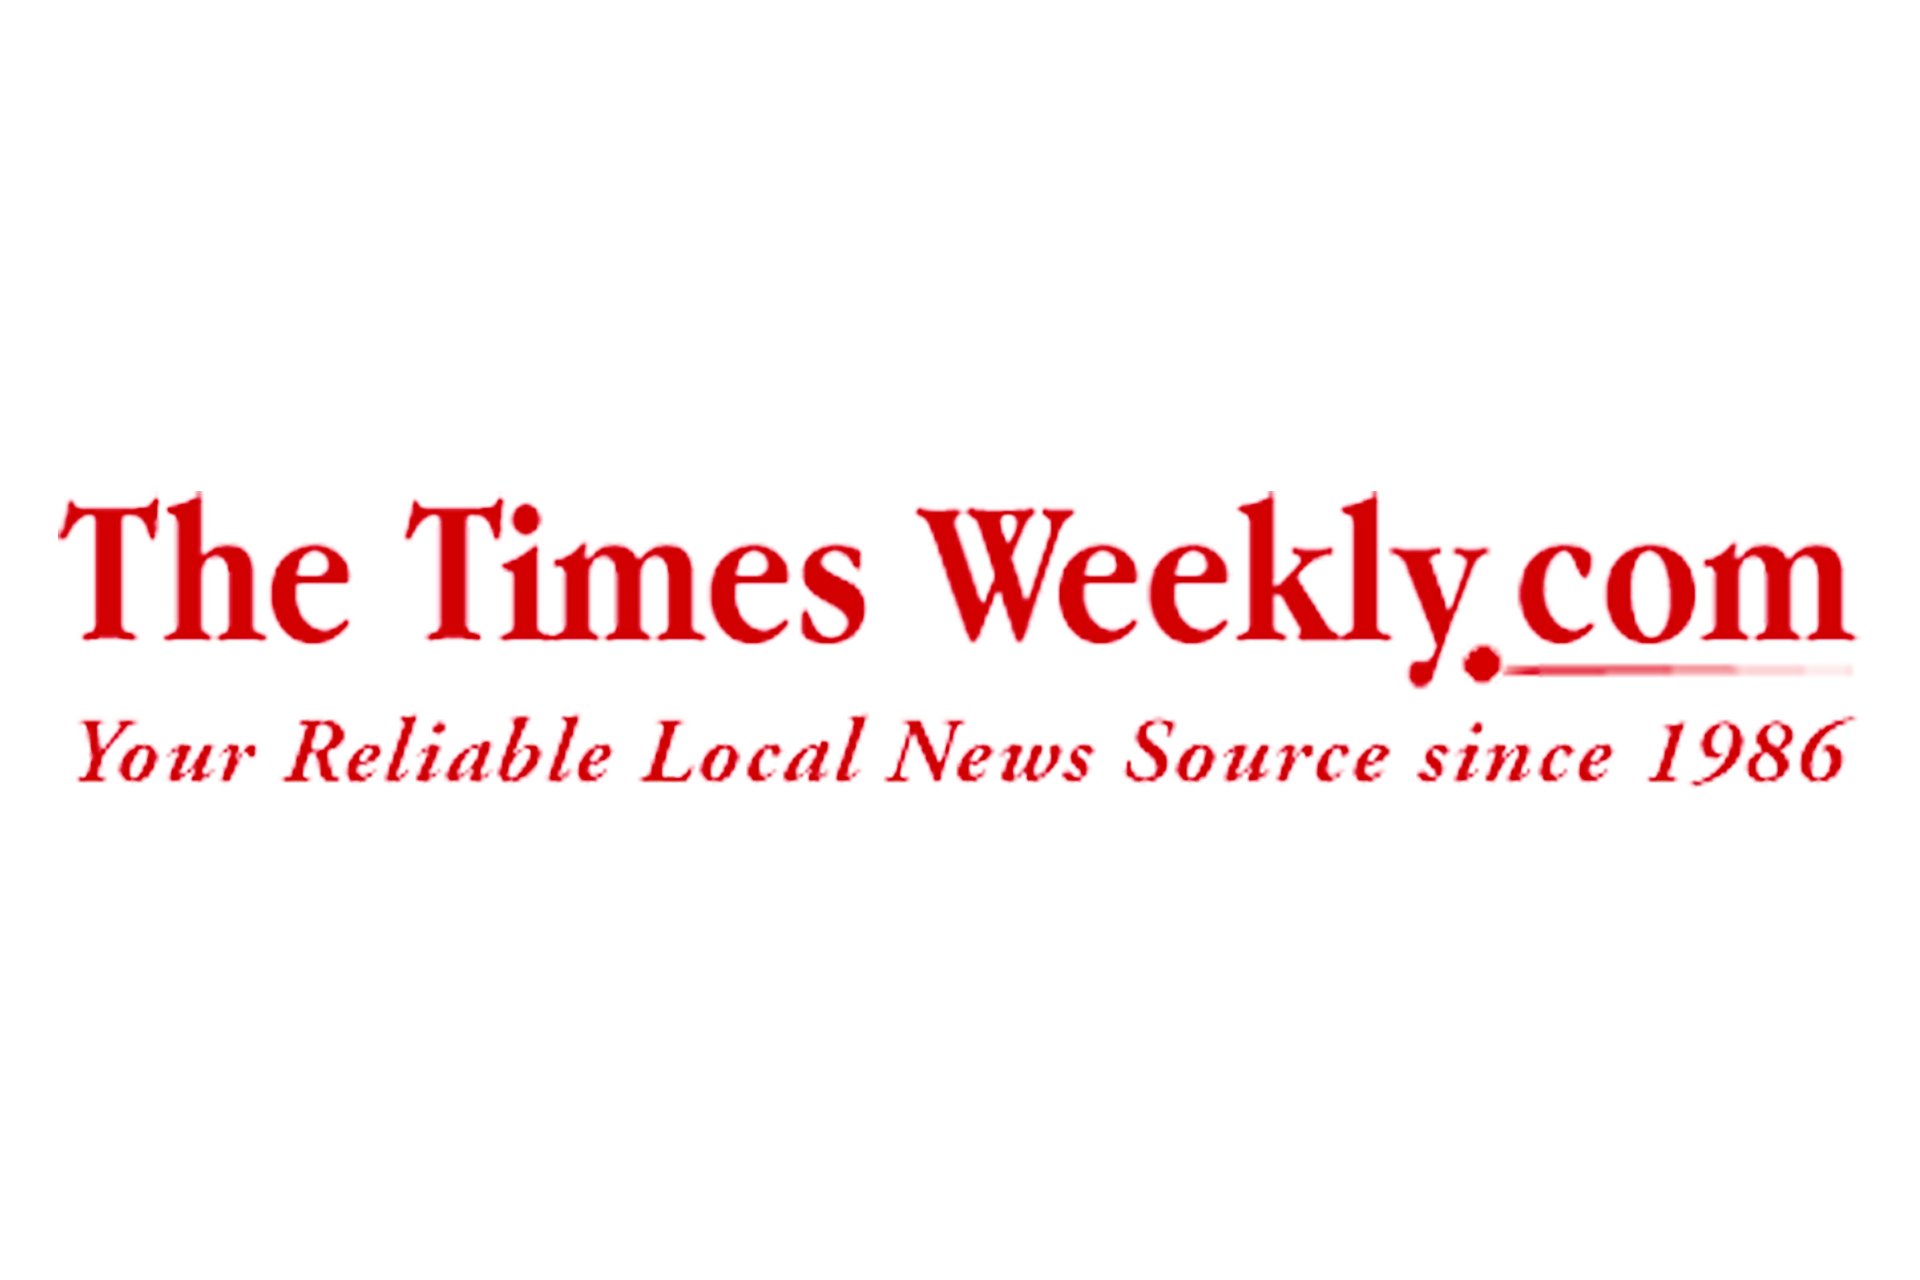 News_logos_0001_The-Times-Weekly.png